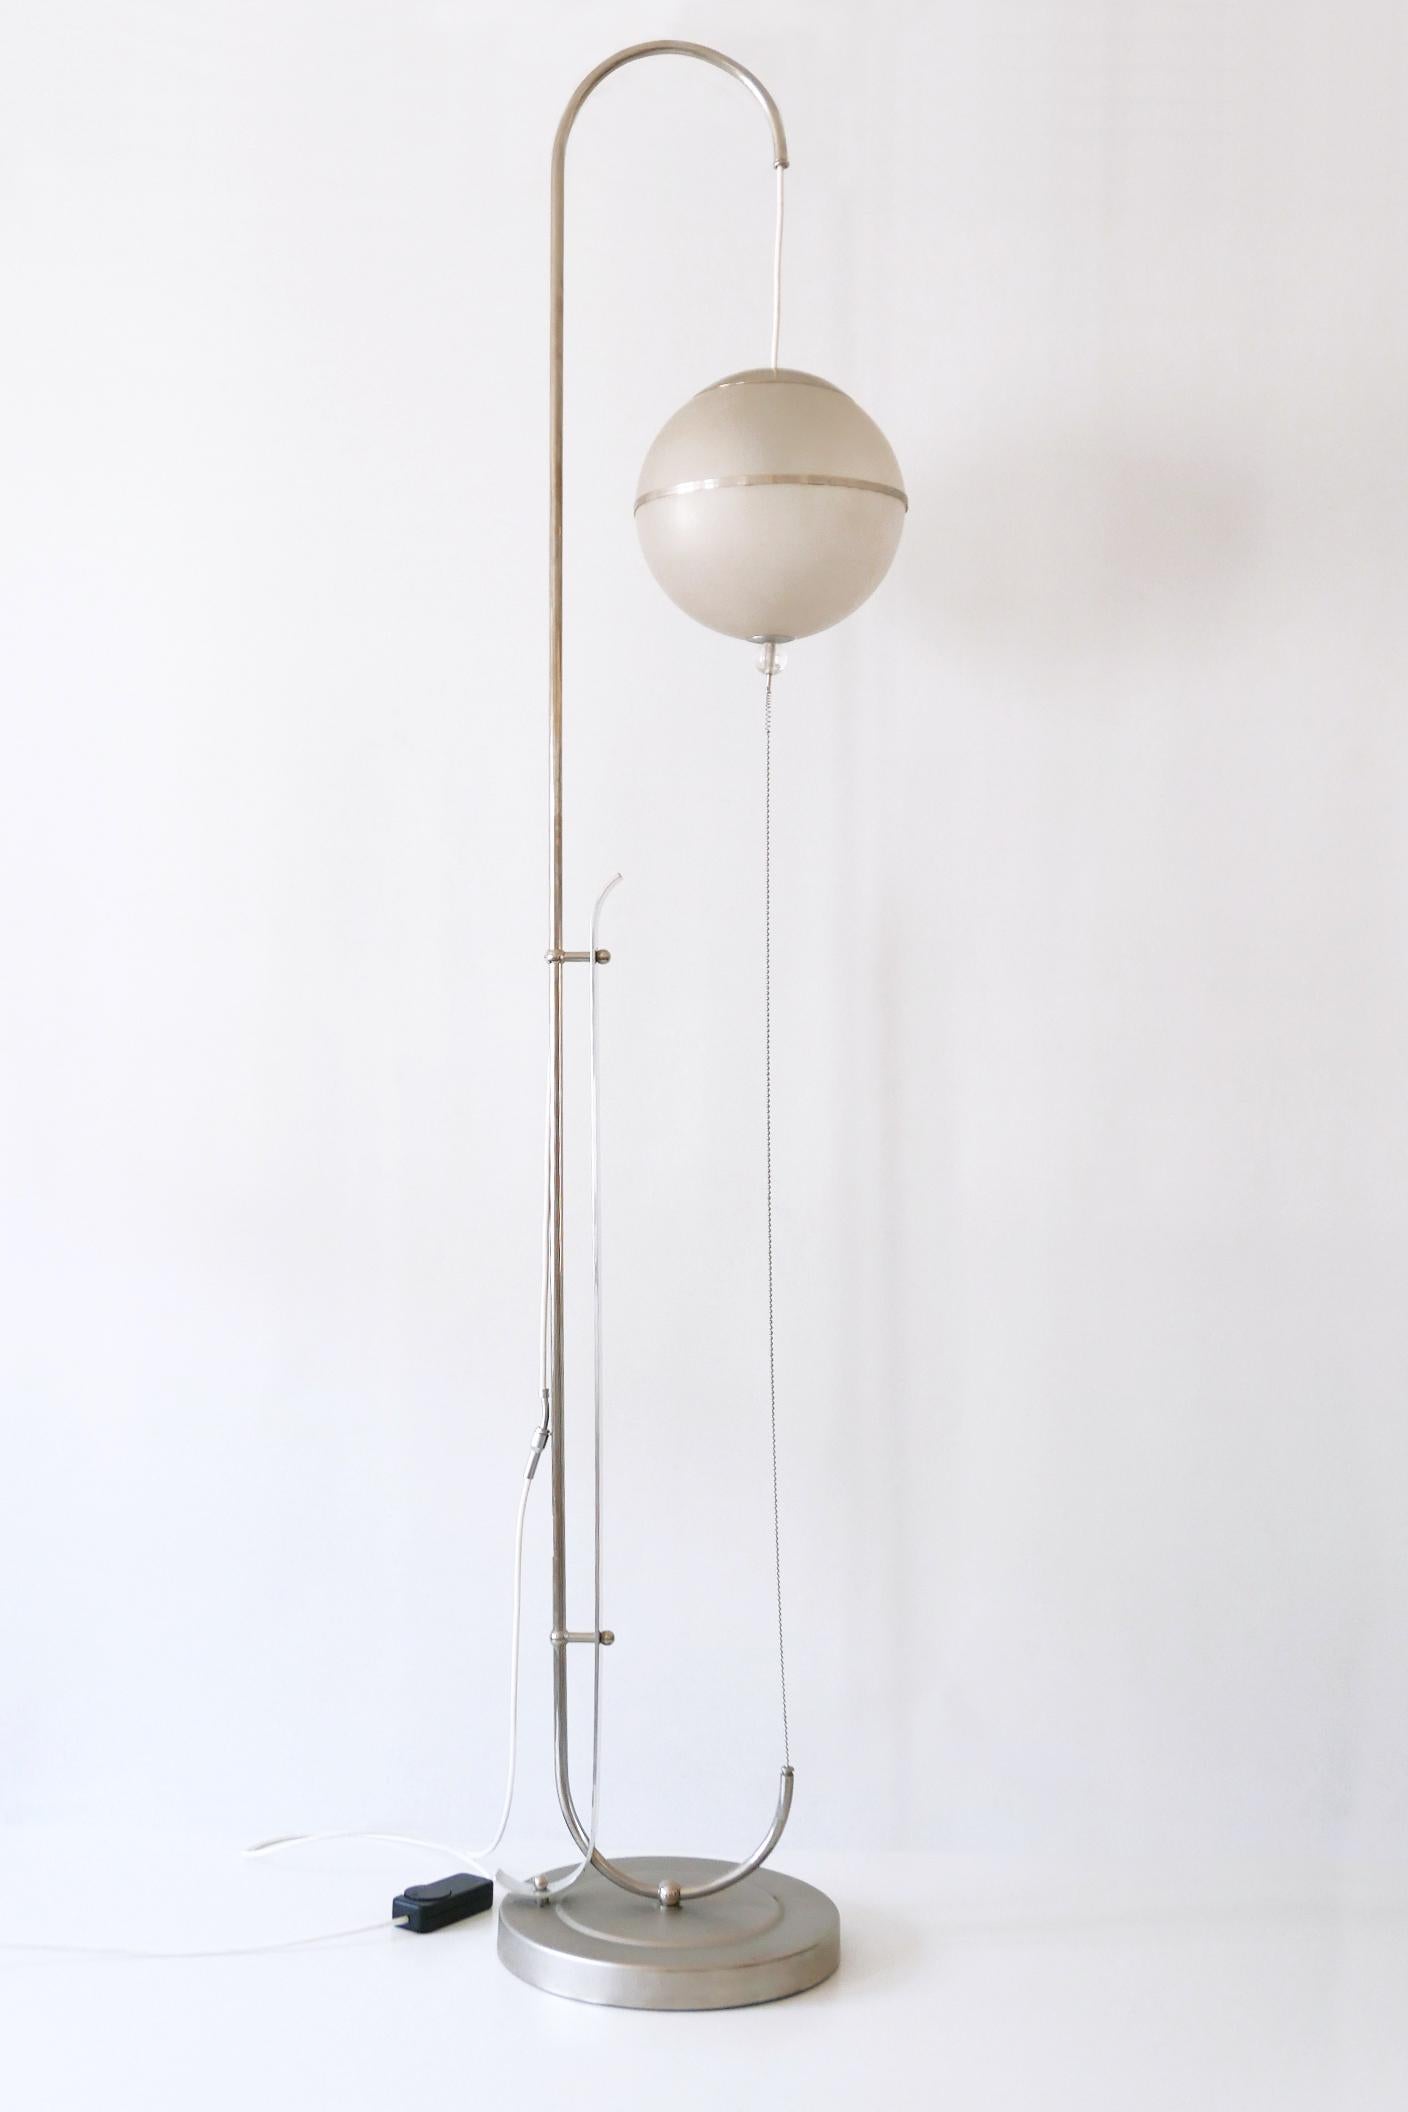 Plated Bauhaus Floor Lamp by Karl Trabert for Schanzenbach & Co 1930s Germany For Sale